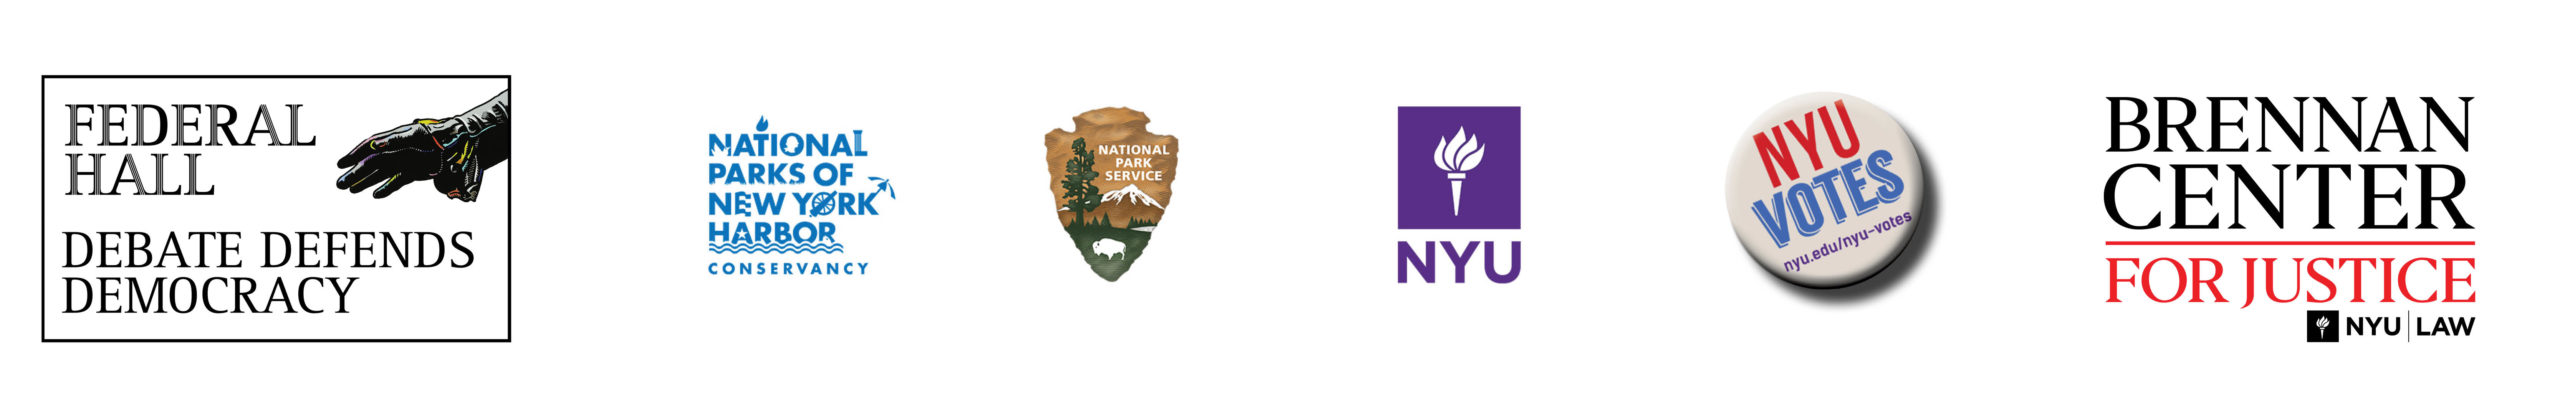 Logos: Federal Hall Debate Defends Democracy, National Parks of New York Harbor Conservancy, National Park Service, NYU, Brennan Center for Justice NYU Law, NYU Votes